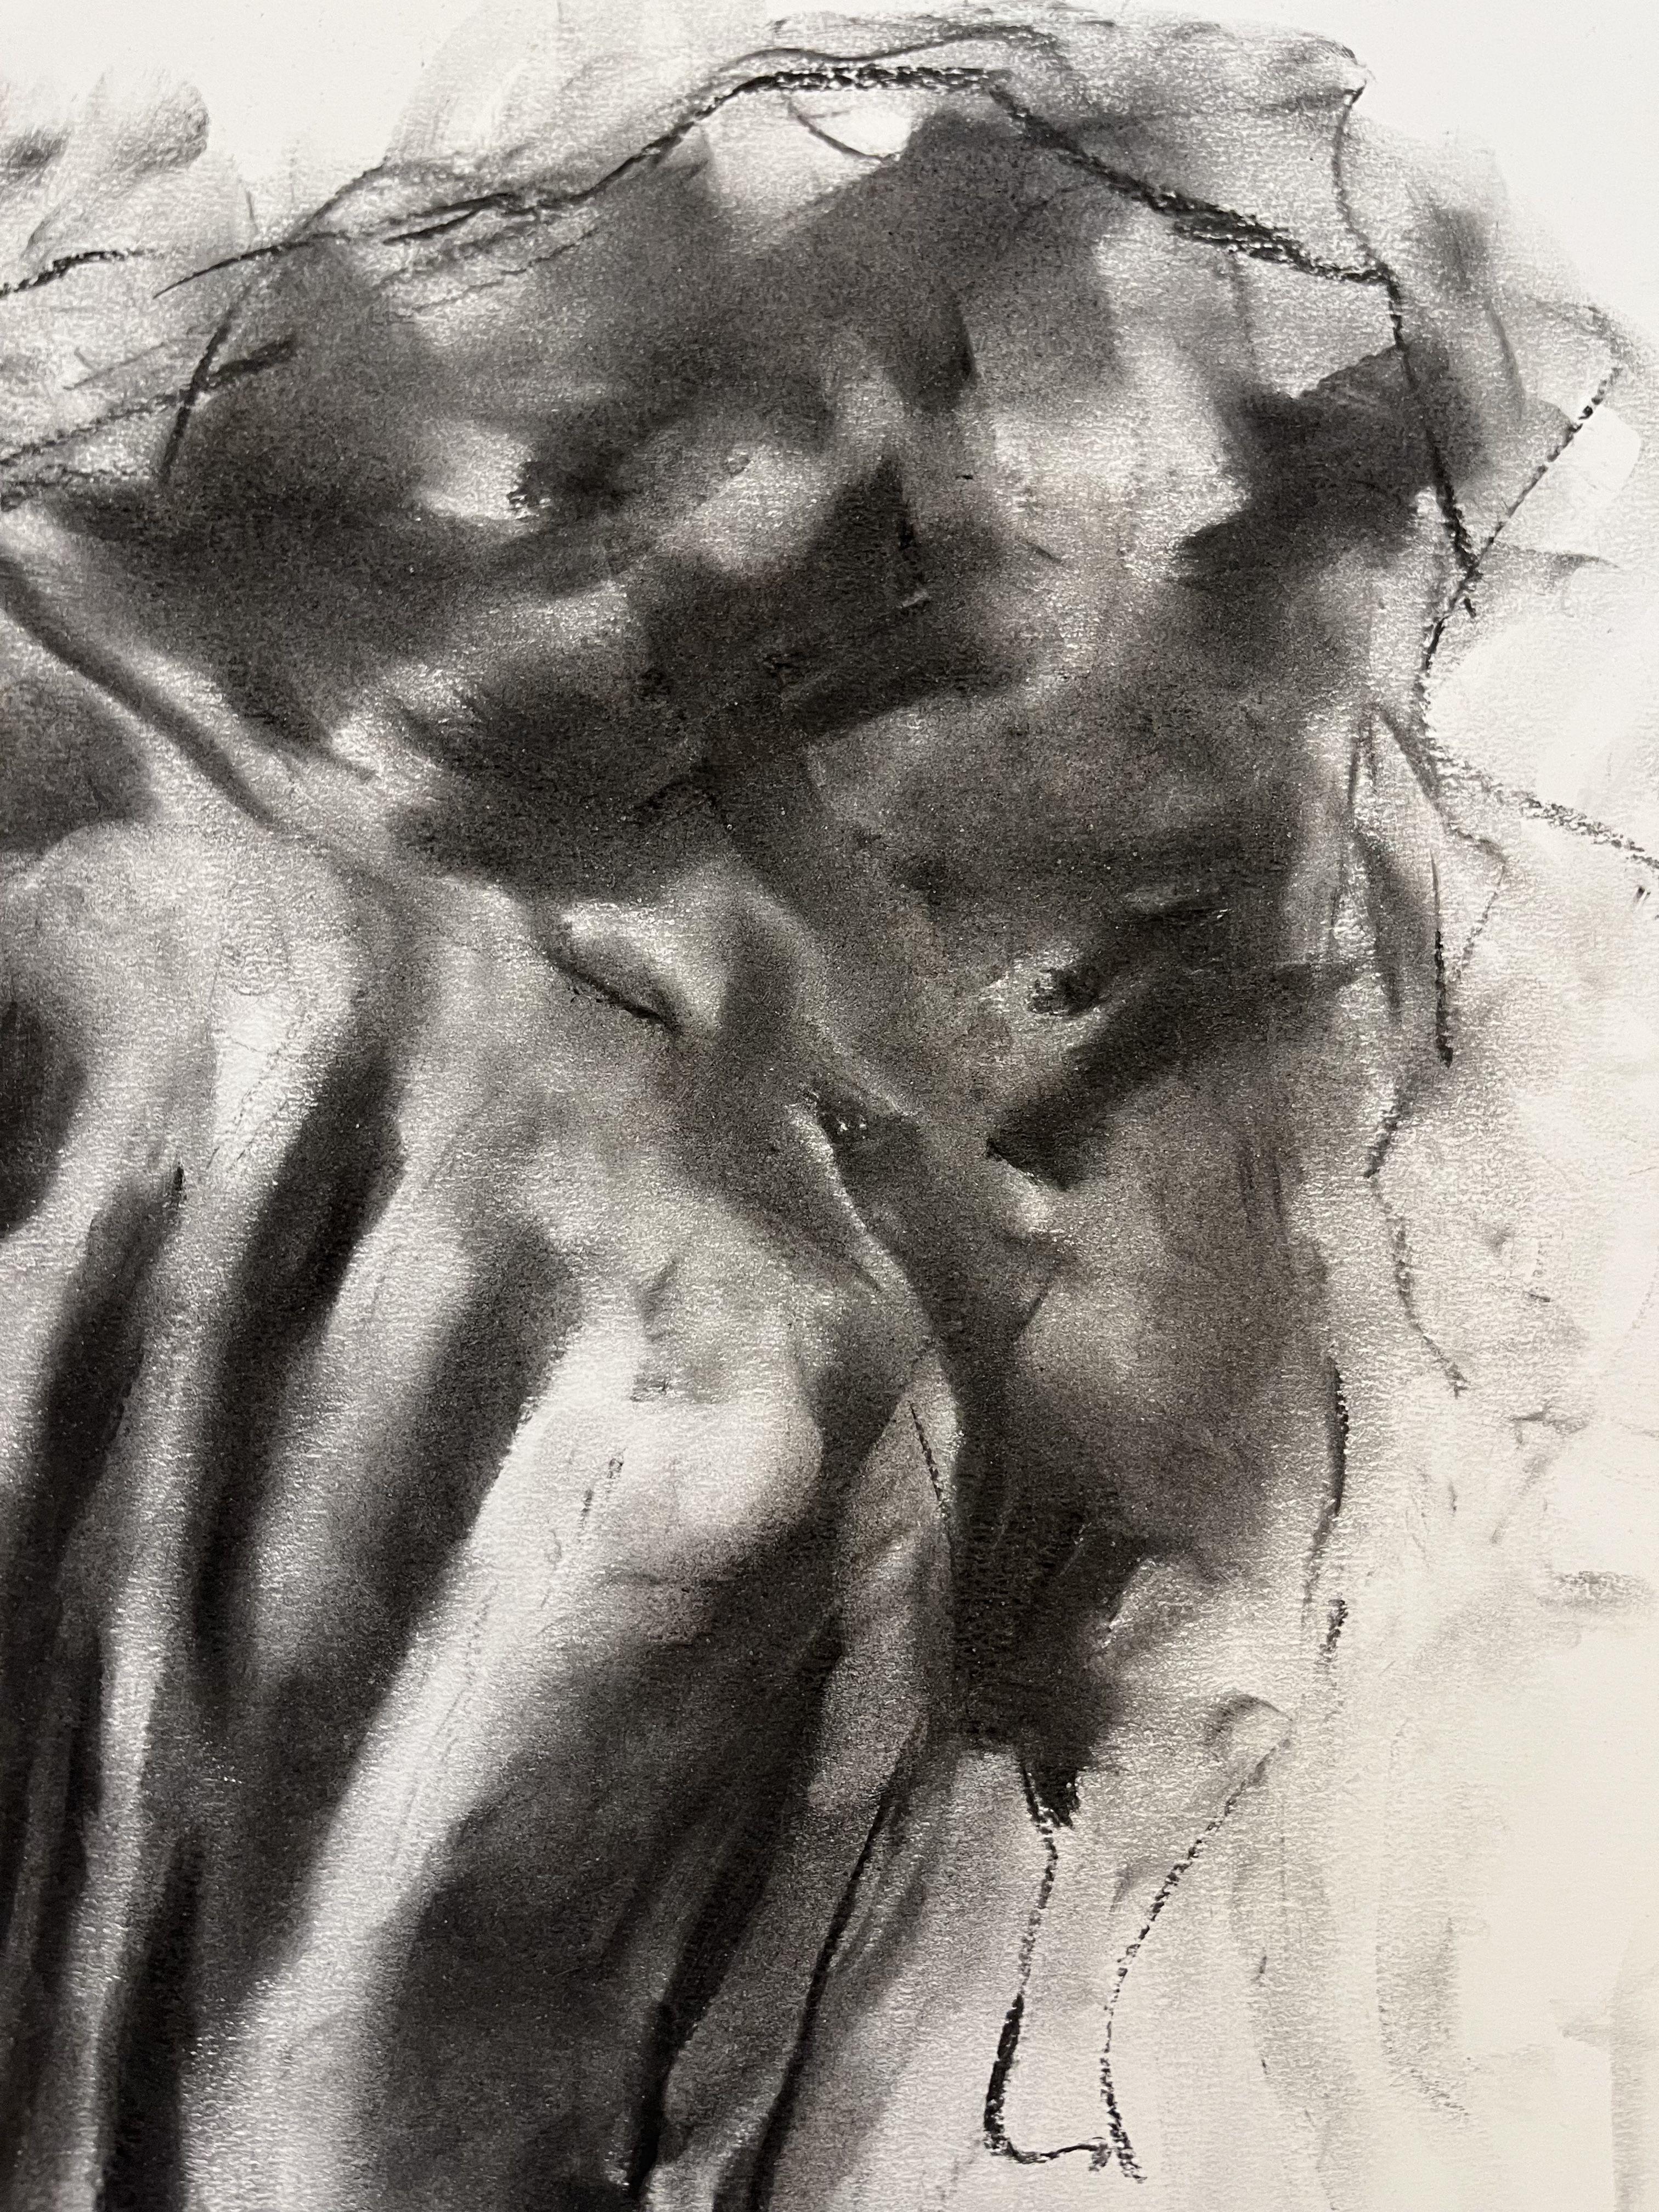 Remember, Drawing, Charcoal on Paper - Impressionist Art by James Shipton